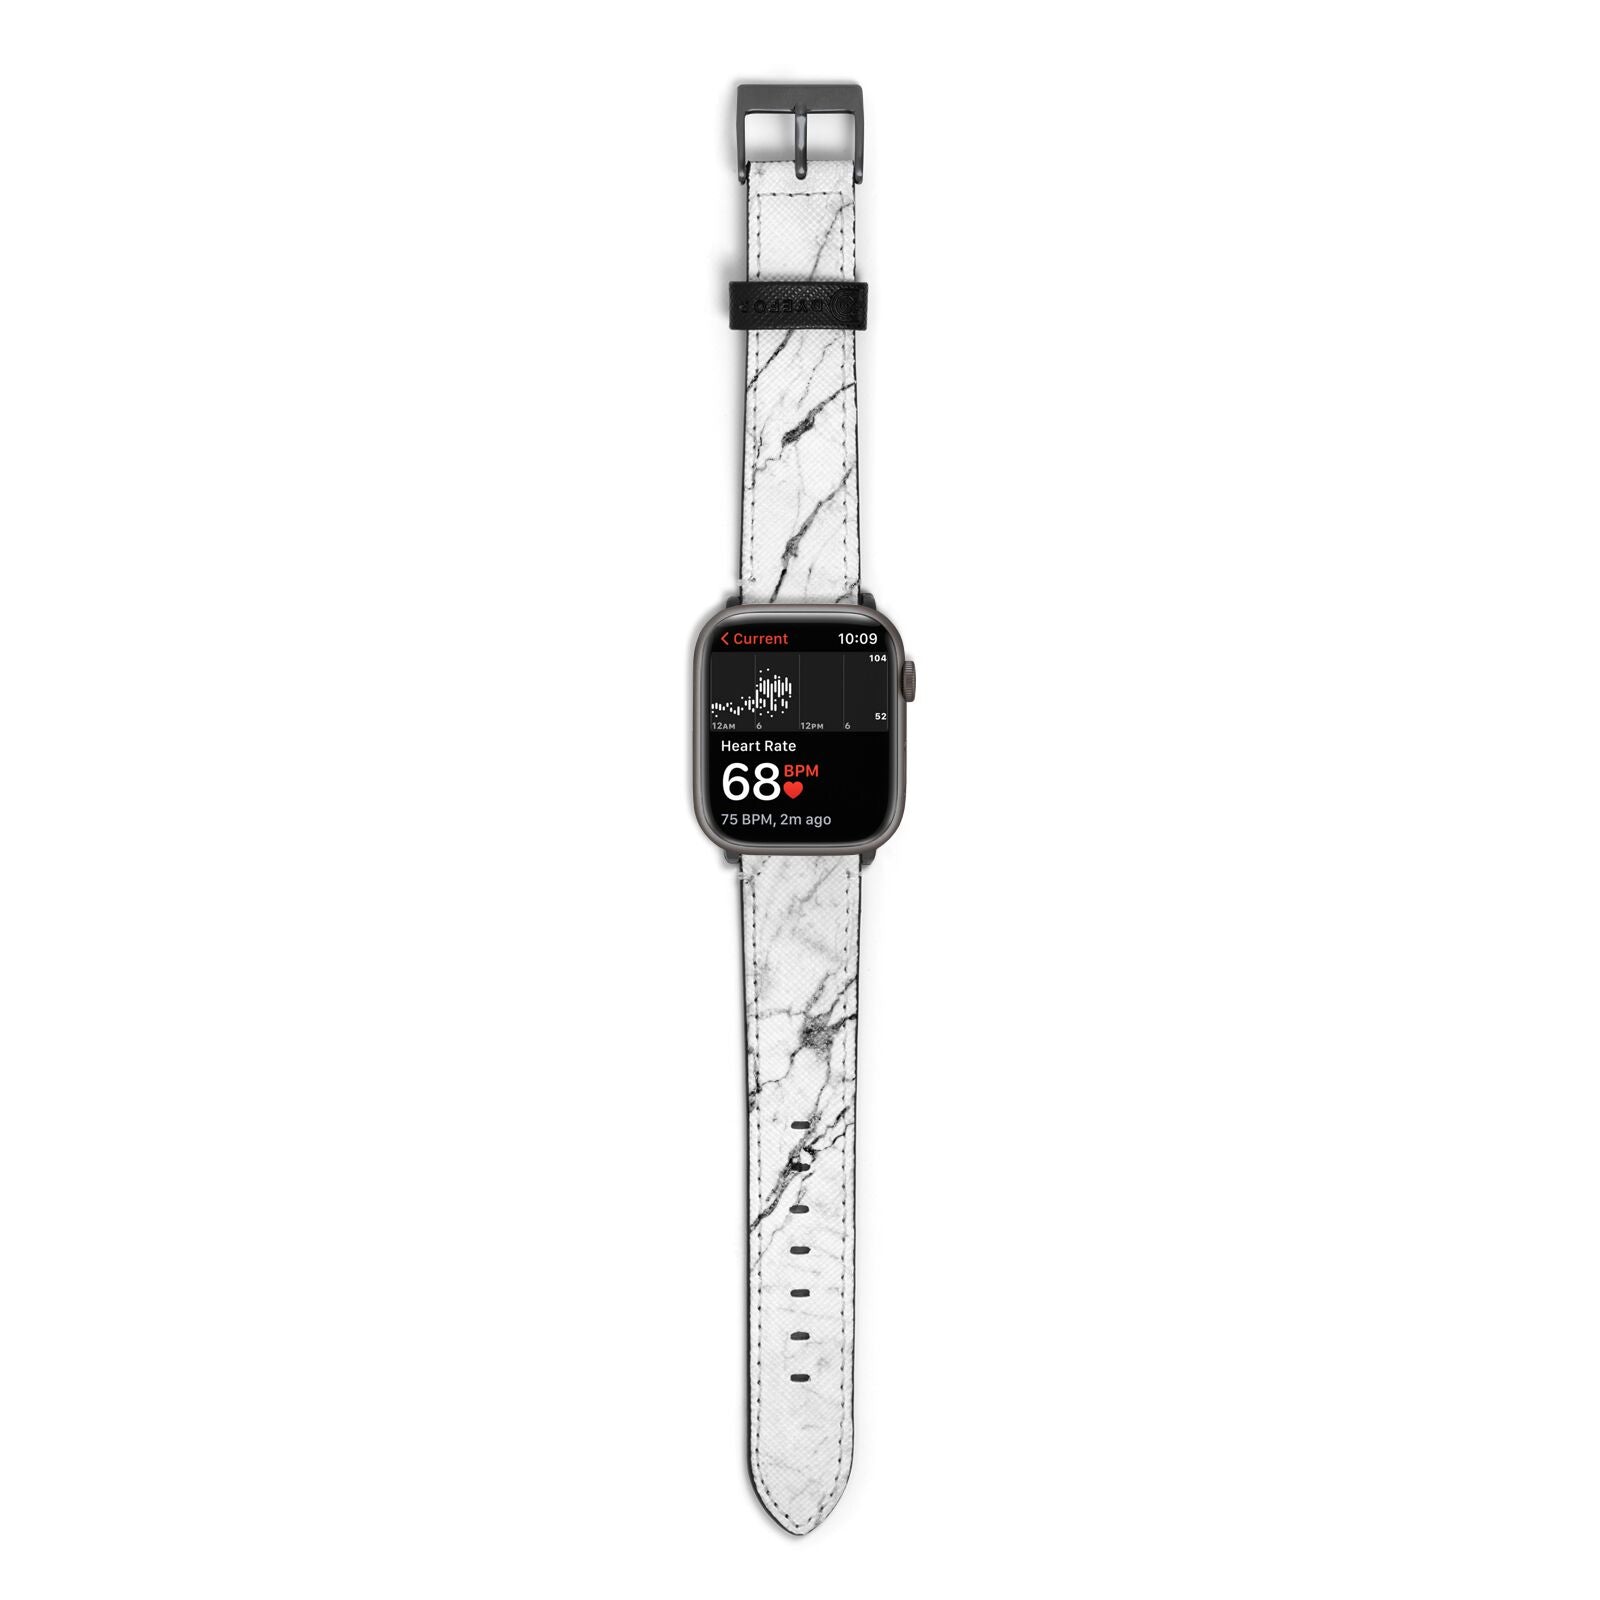 Marble White Apple Watch Strap Size 38mm with Space Grey Hardware